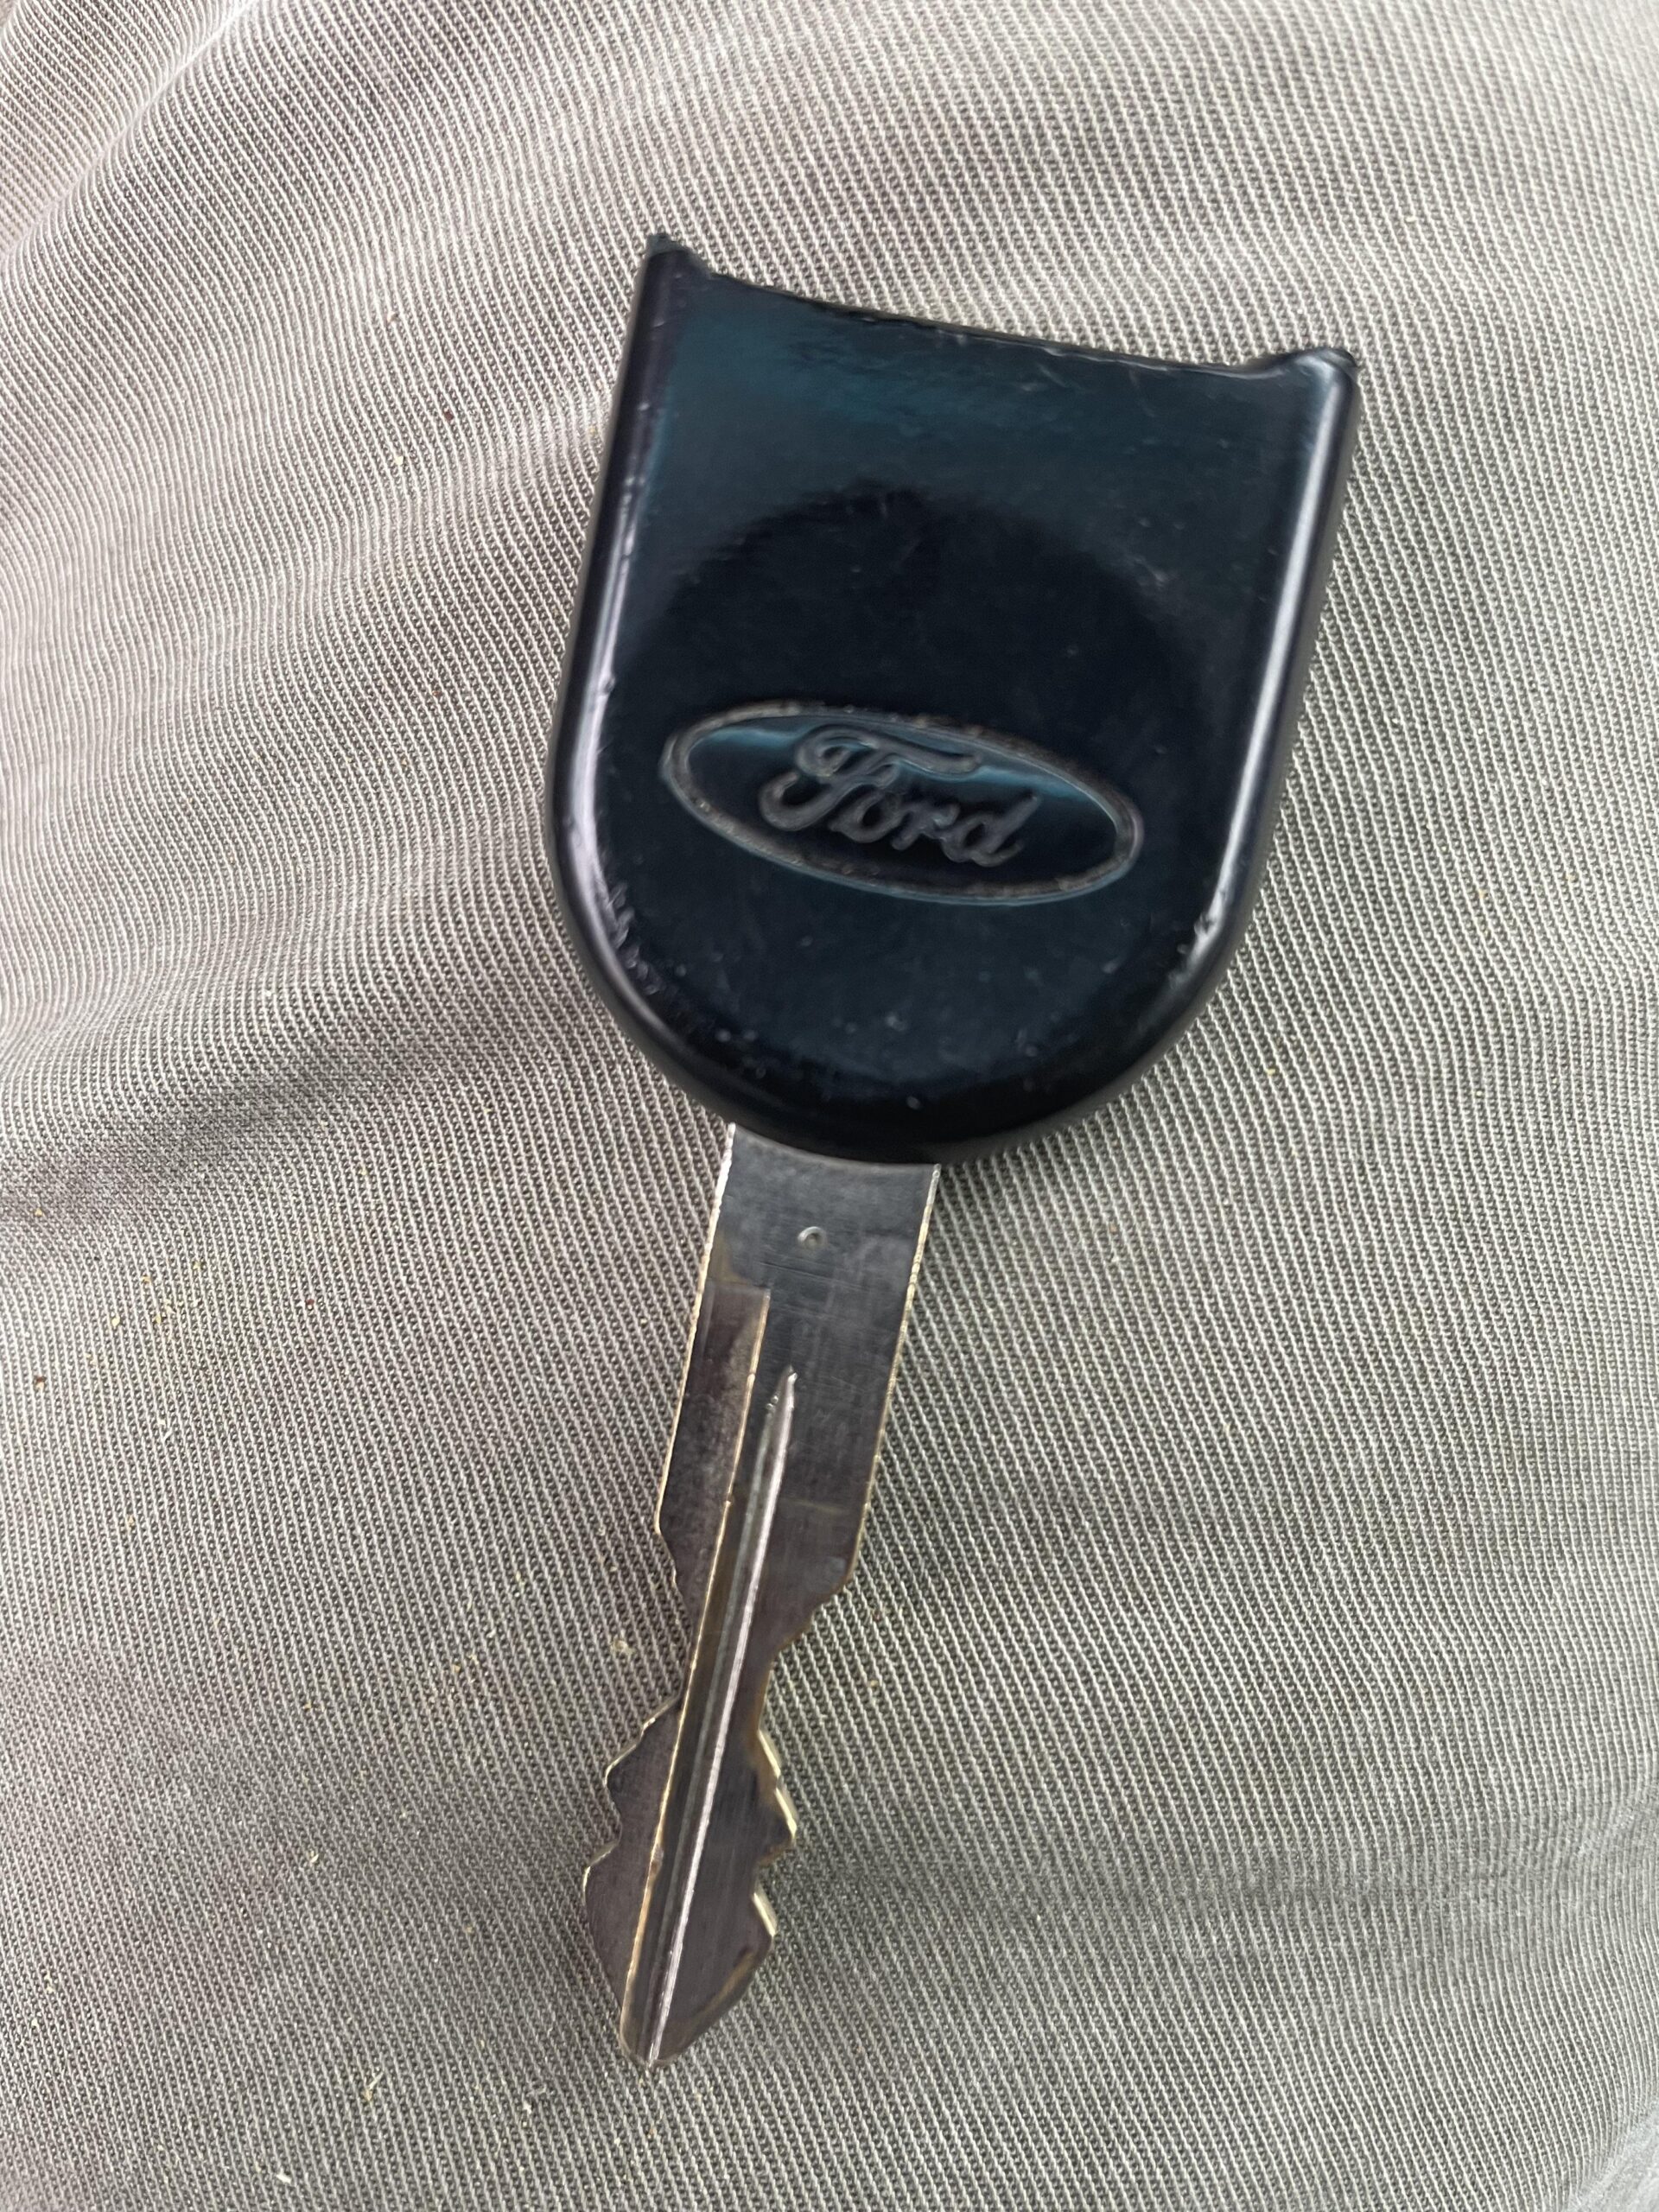 Does 2008 Ford F150 Key Have a Chip